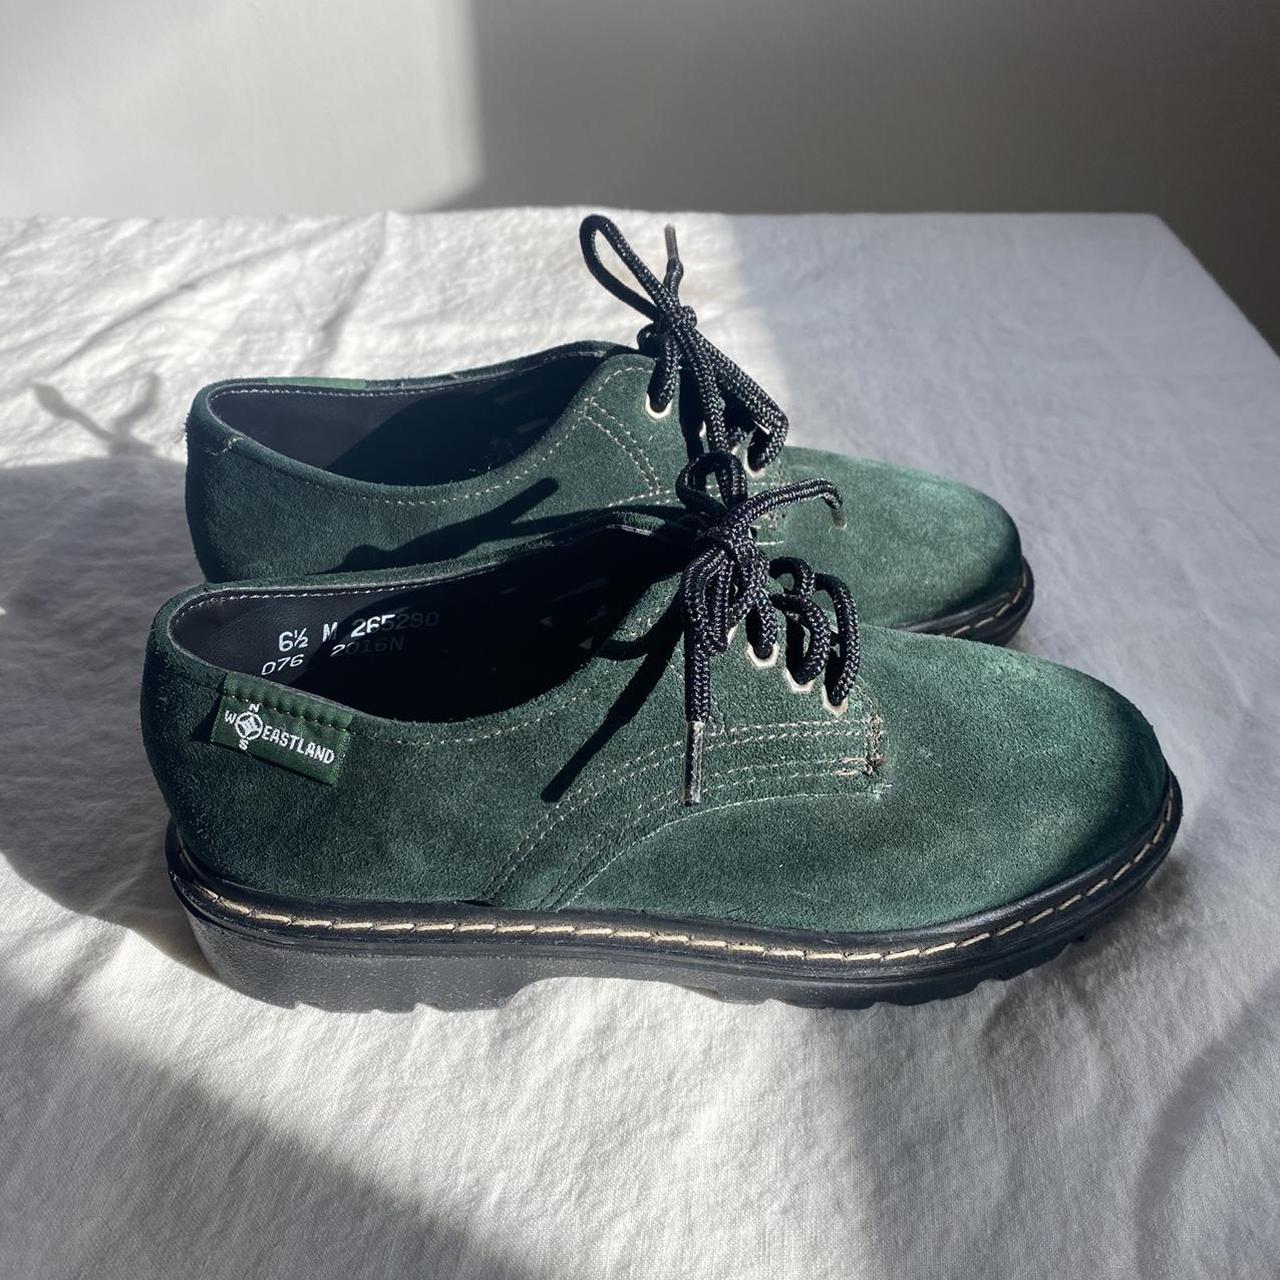 Eastland Women's Green and Black Oxfords